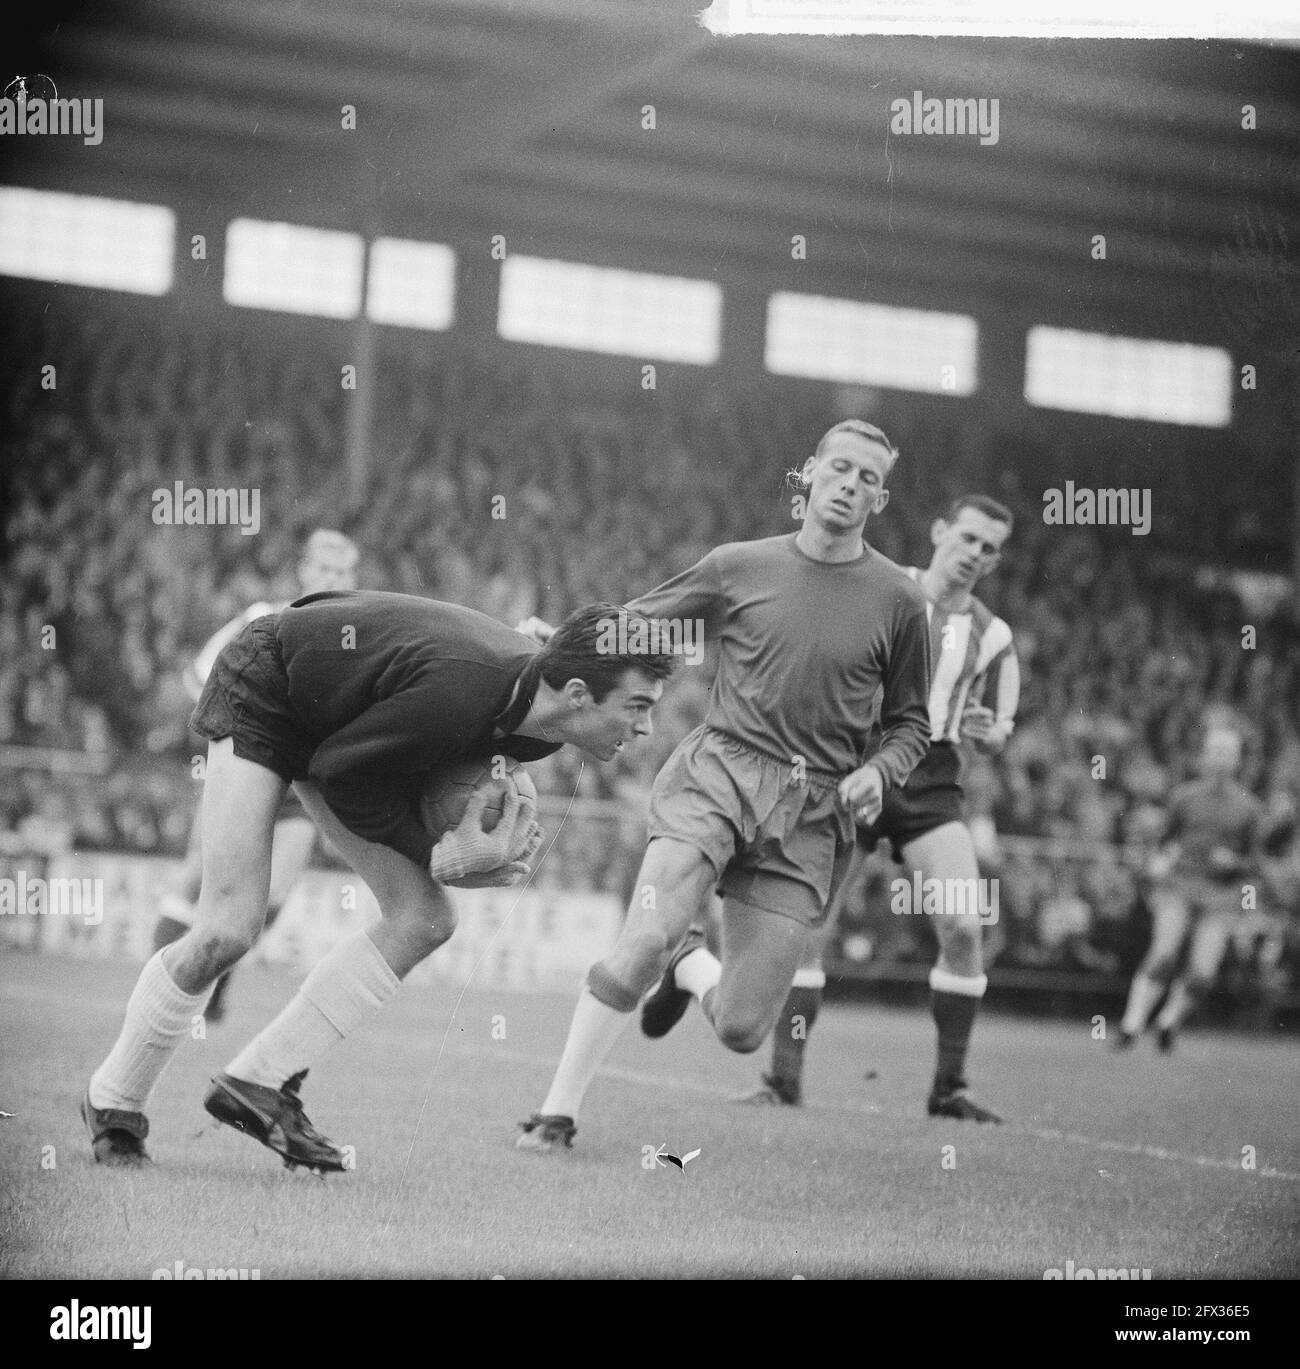 Ajax against PSV 2-0, Nuninga in duel with Strich, 5 September 1965, duels, sports, soccer, The Netherlands, 20th century press agency photo, news to remember, documentary, historic photography 1945-1990, visual stories, human history of the Twentieth Century, capturing moments in time Stock Photo